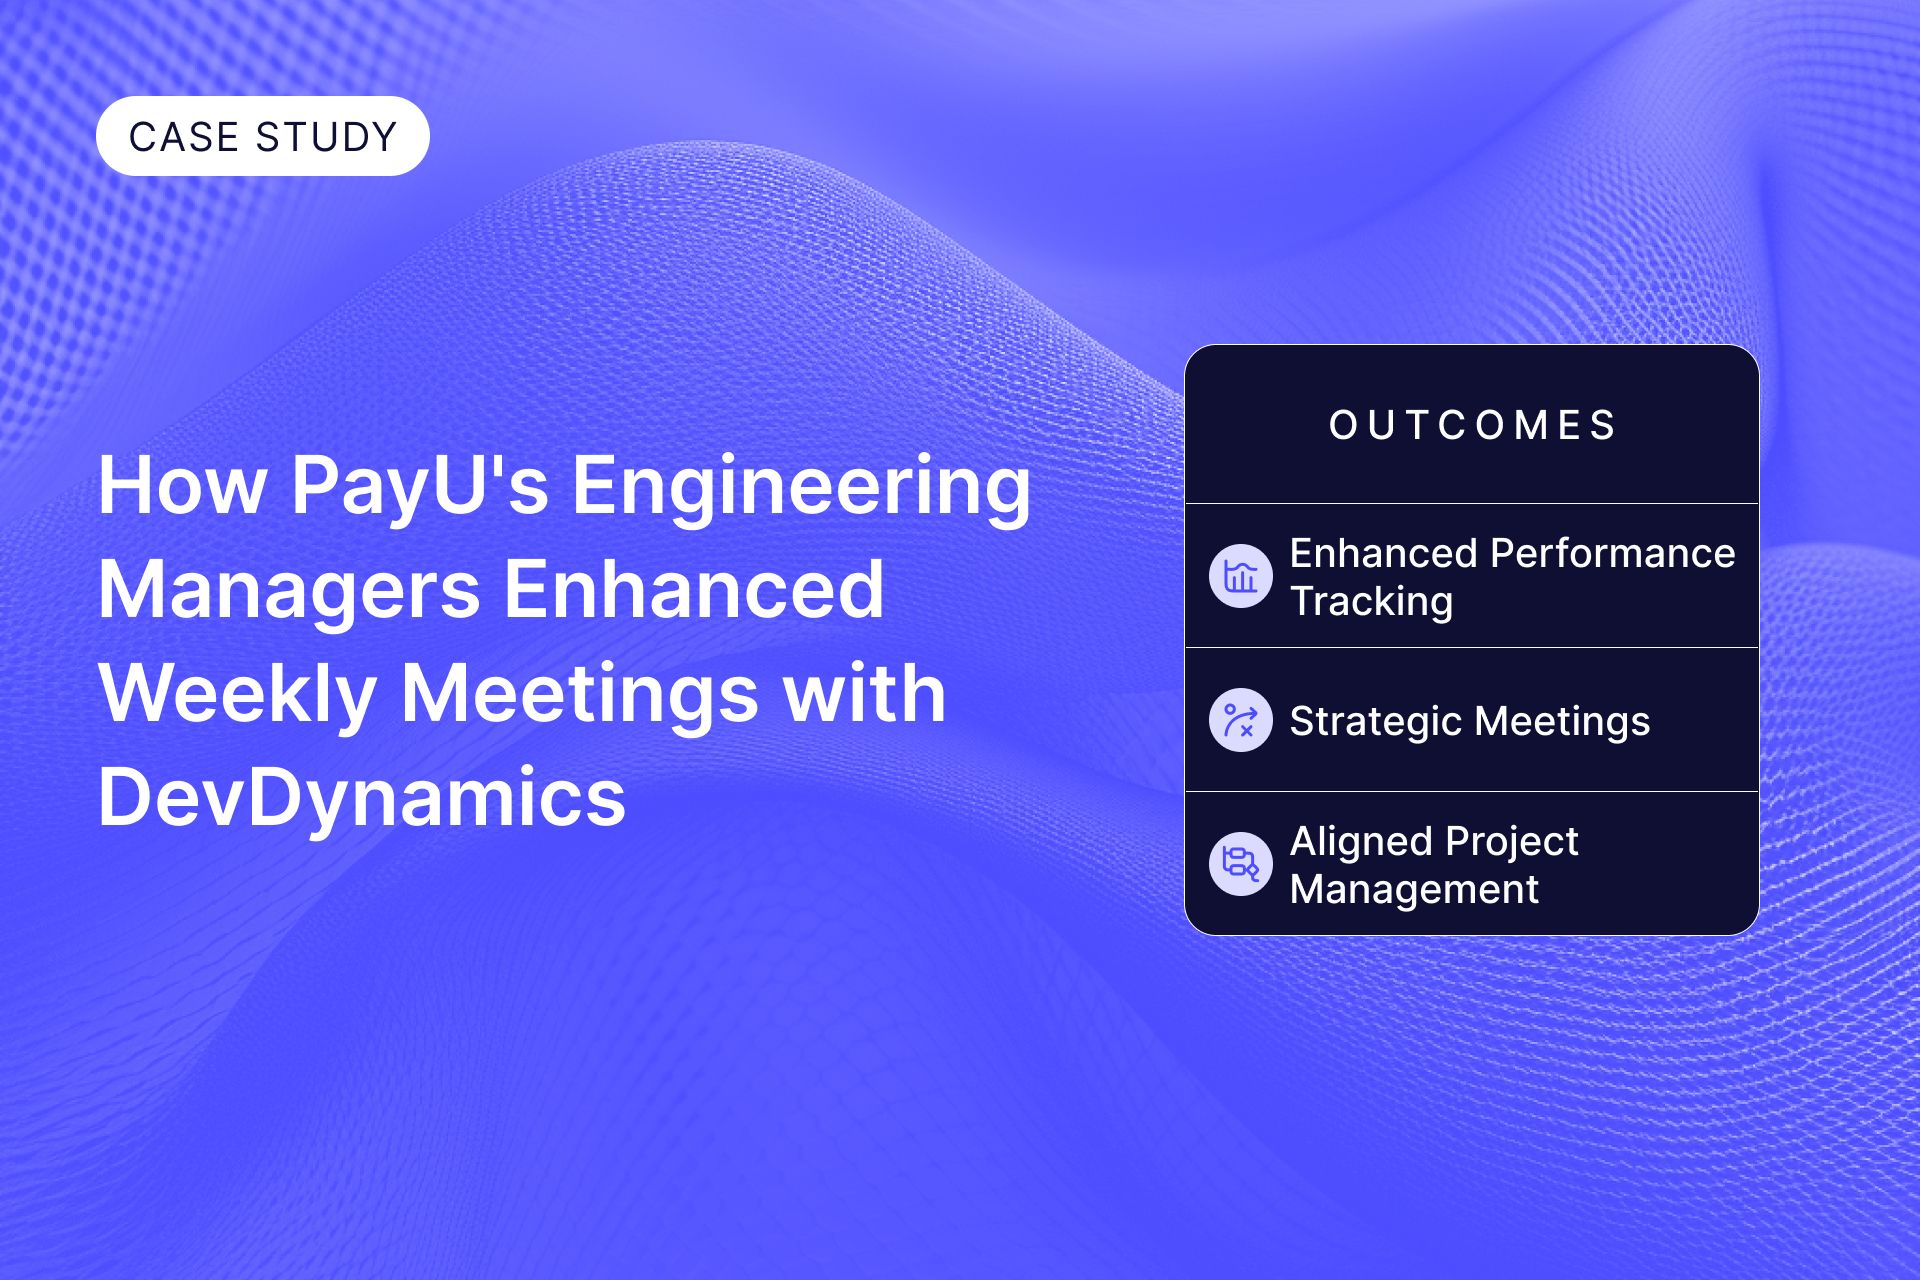 Case Study: How PayU's Engineering Managers Enhanced Weekly Meetings with DevDynamics